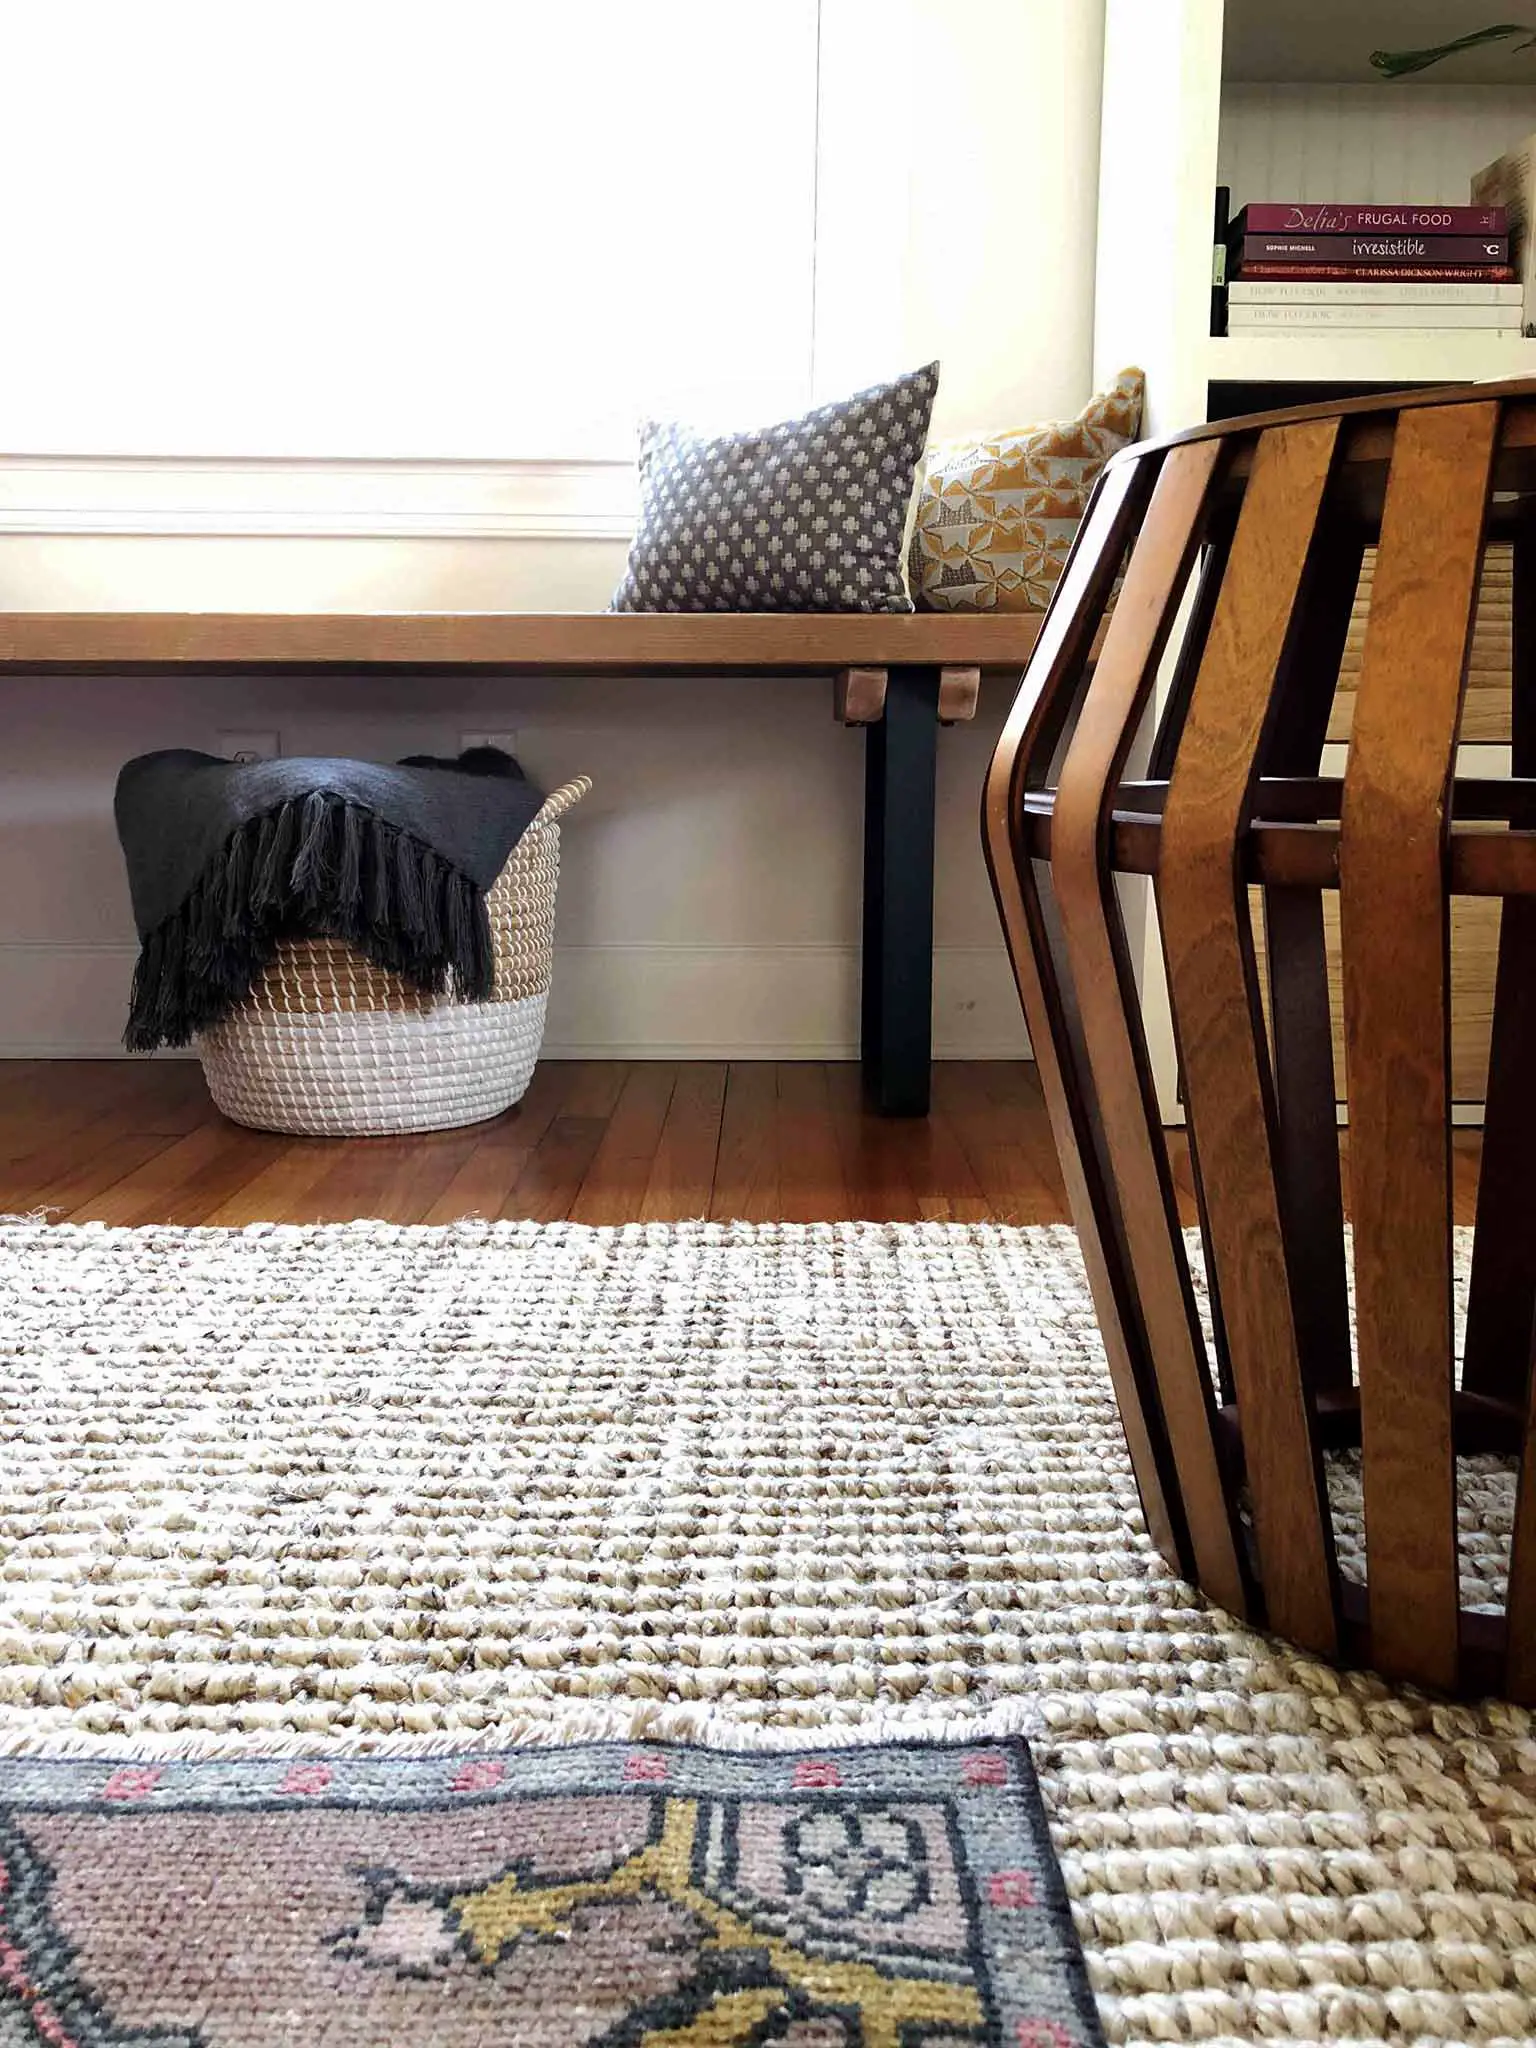 Using a basket to hide a router | 14 of My Favorite Products to Help You Organize What's Left After Decluttering | That Homebird Life Blog | #organization #organizationideas